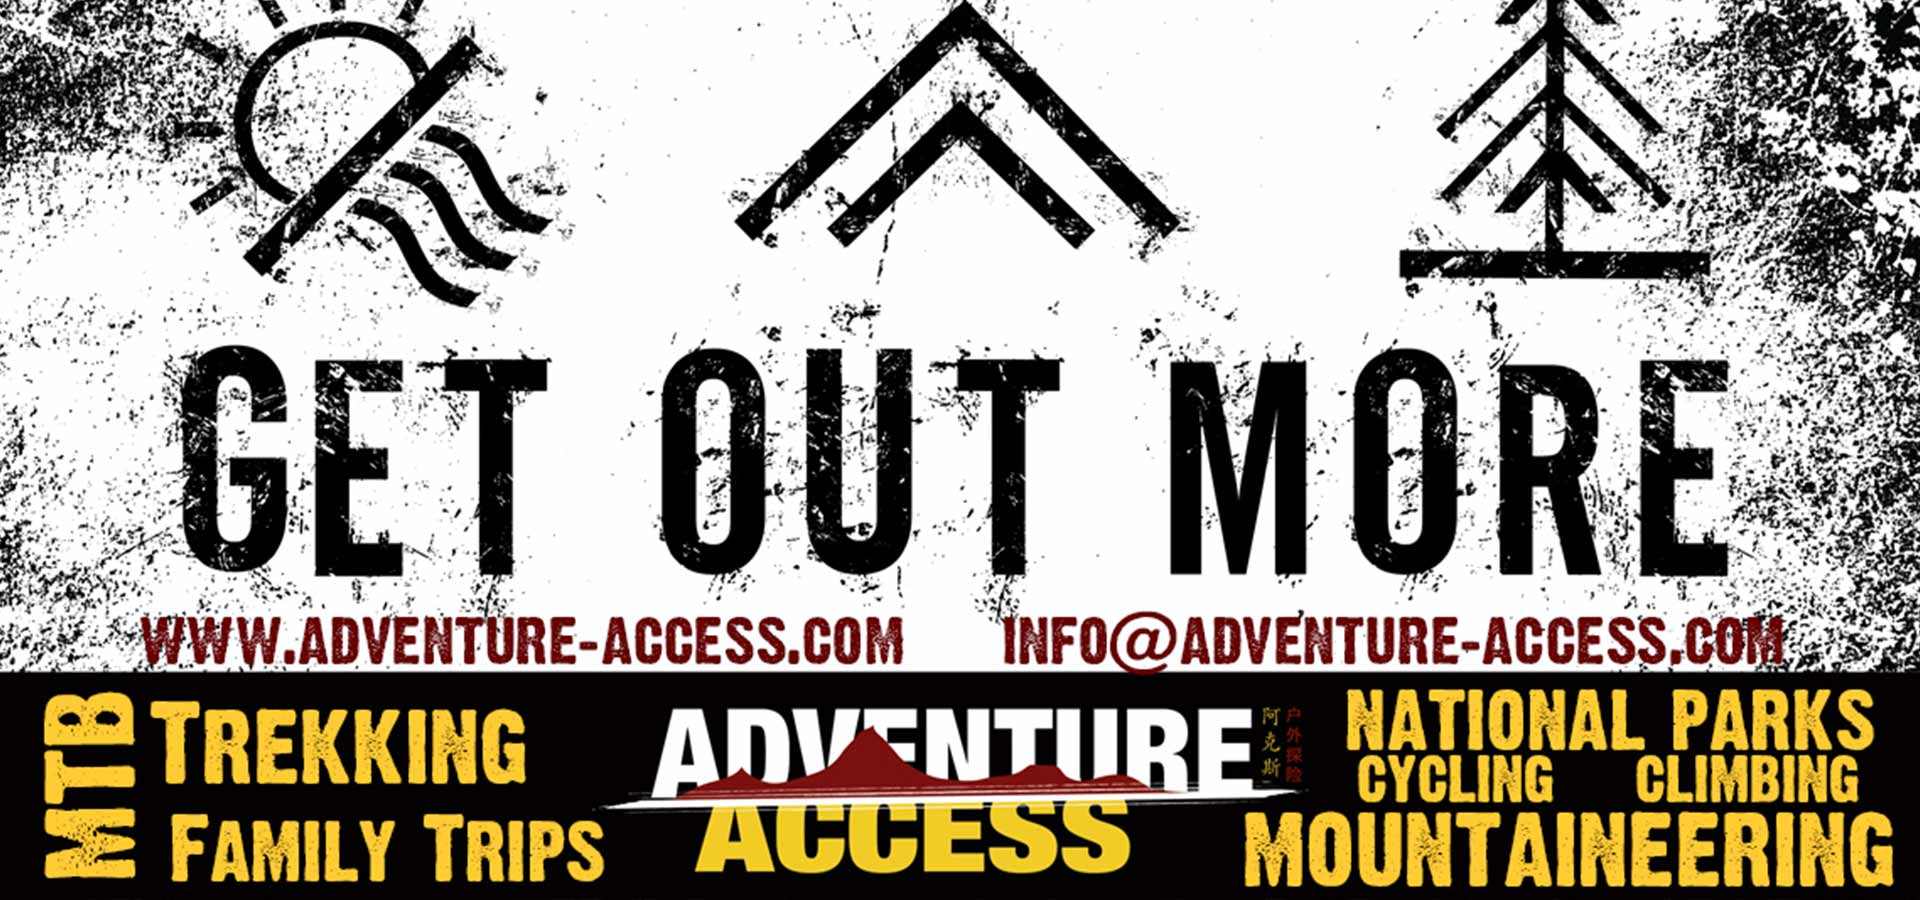 New-blog-post-Adventure-Access- Xian Get Out More